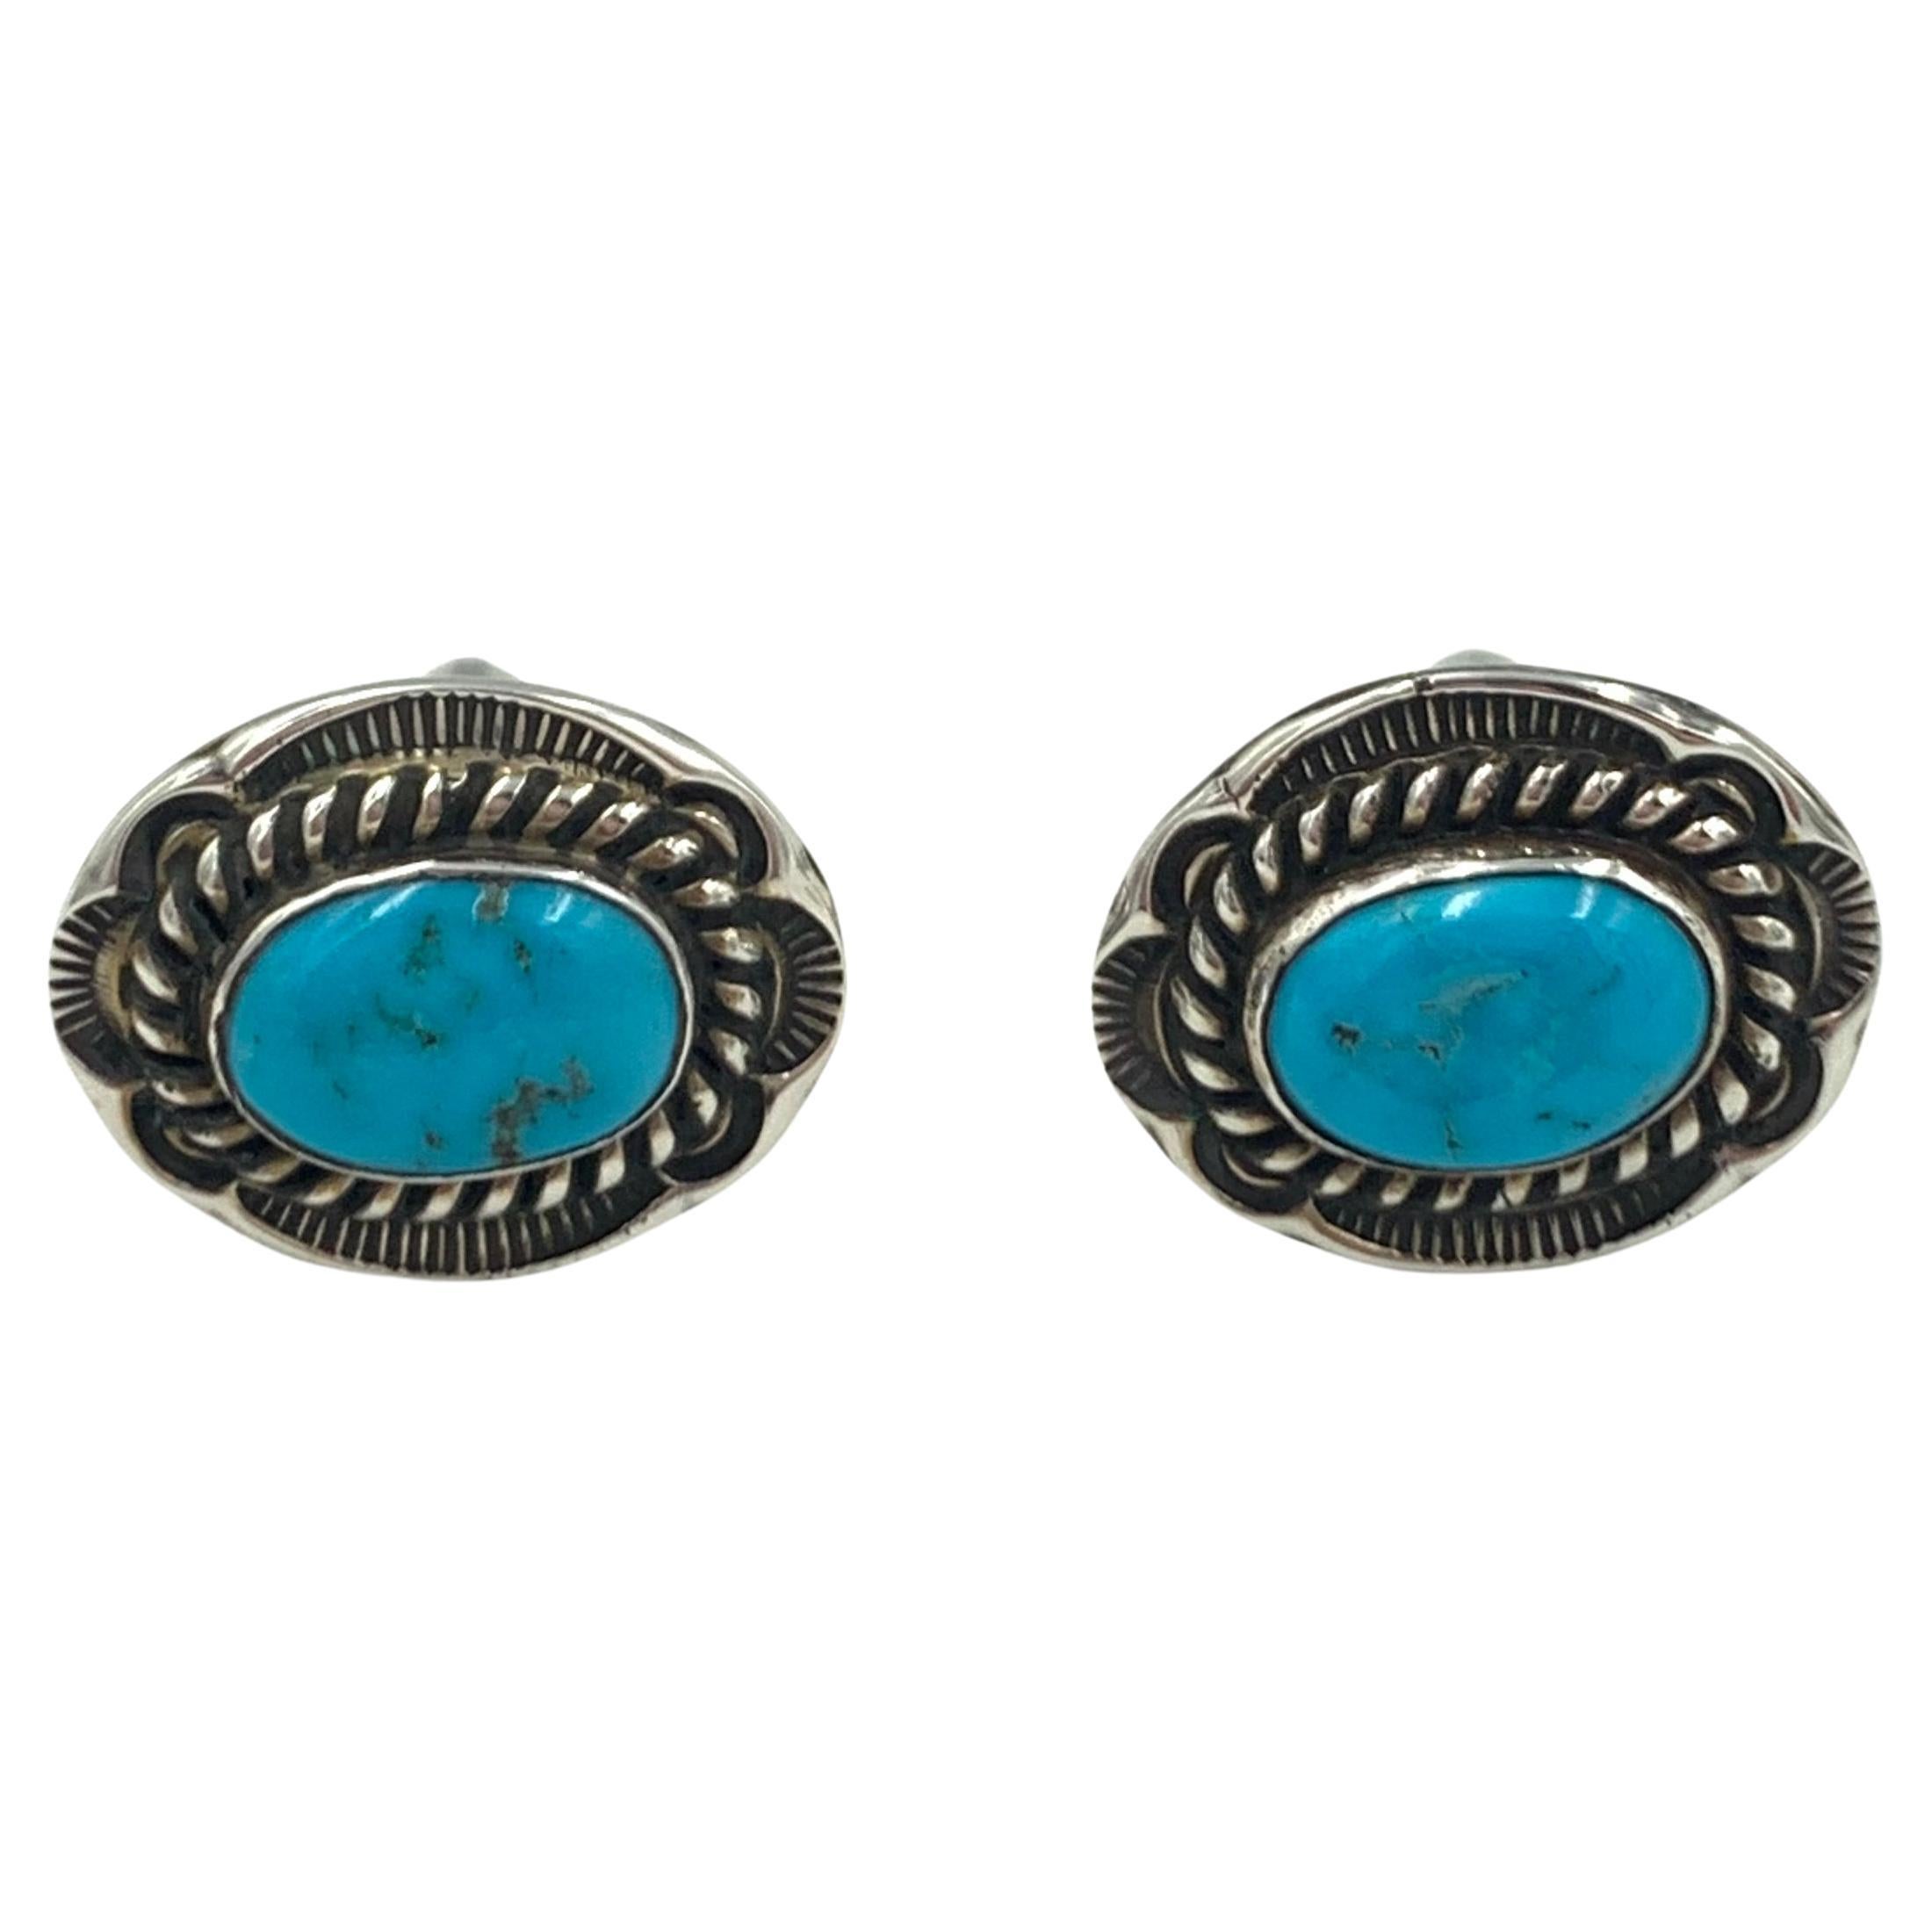 Women's or Men's Cuff Links with Kingman Turquoise Gemstone by Dan Oliver